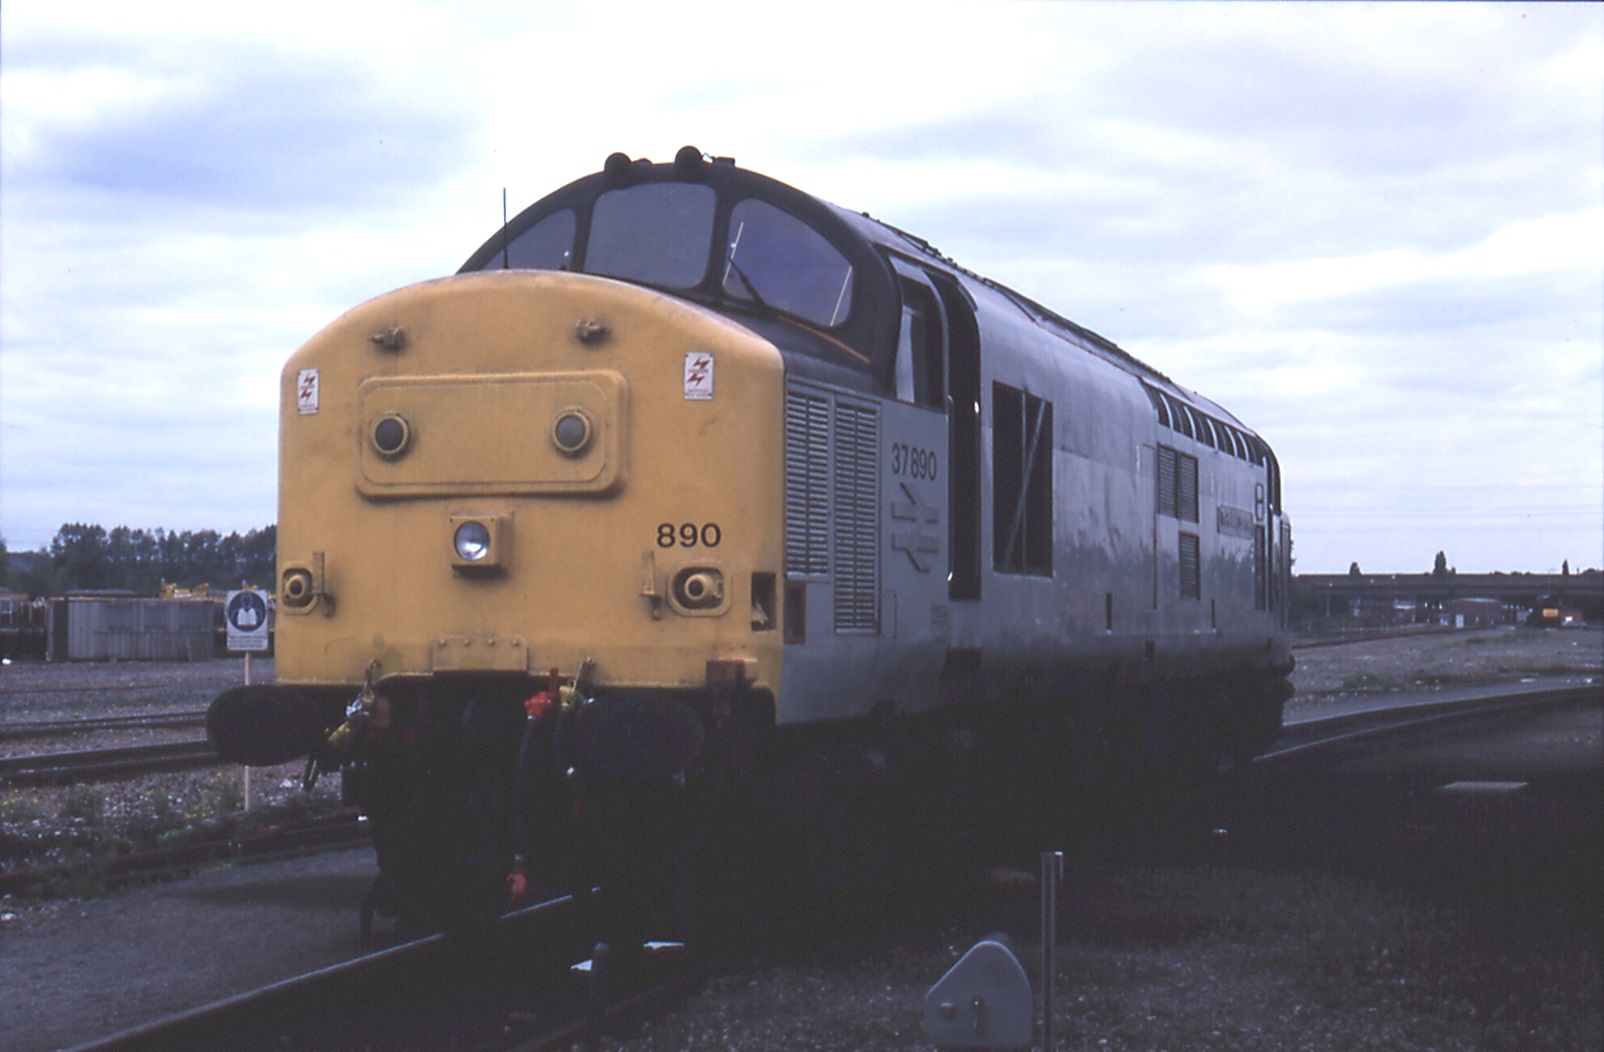 37890 stabled at Toton TMD, shortly after the Petroleum sector decals had been removed, 18th September 1994. Bob Wallen